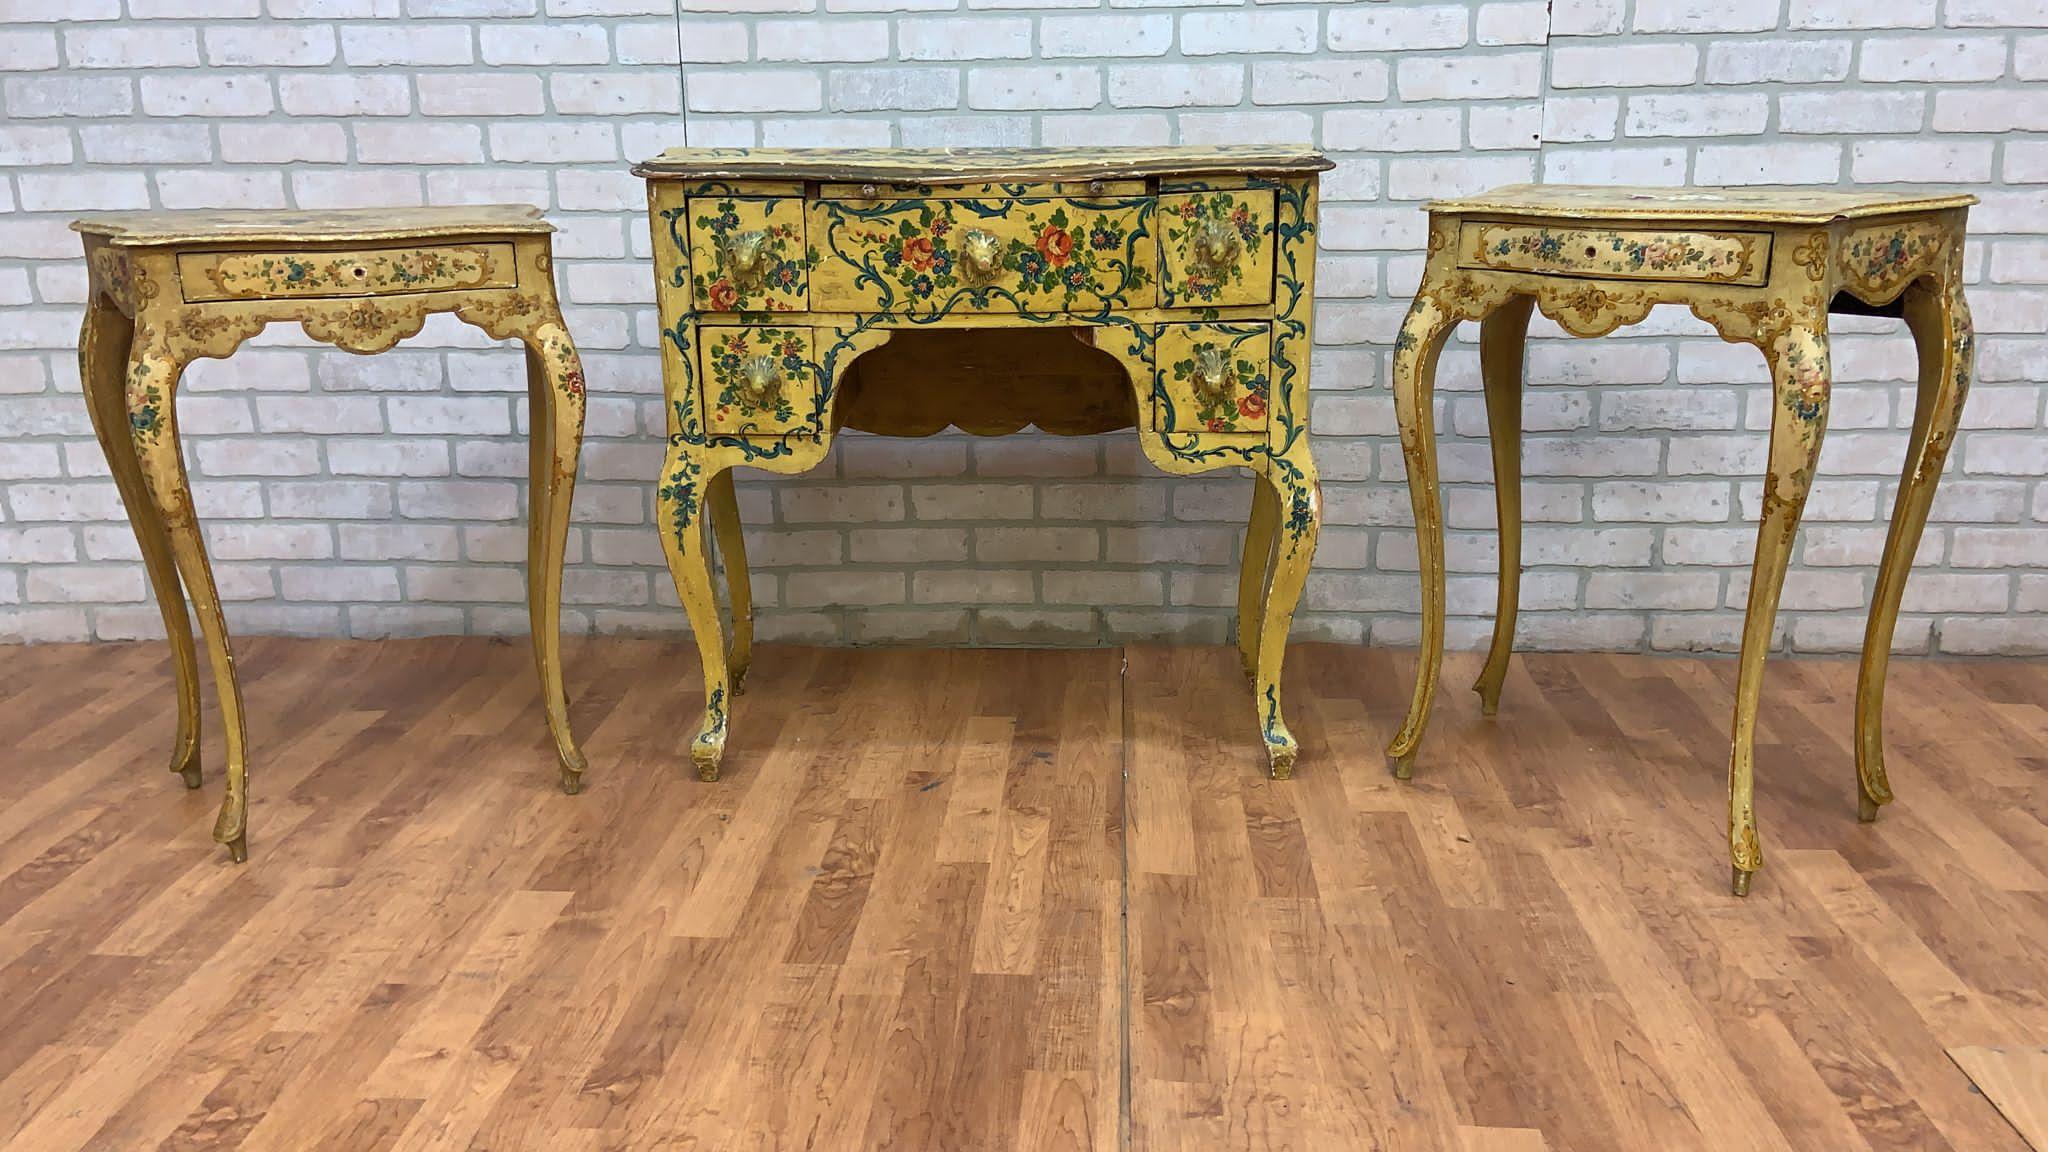 Antique Rococo Style Venetian Hand Painted vanity desk with 2 Single-Drawer Side Tables - 3 Piece Set

Rare & Unique Antique Venetian Hand-Crafted and Hand-Painted Scrolling Vines & Floral Motif 3 Piece Set.

The Set is being Offered 